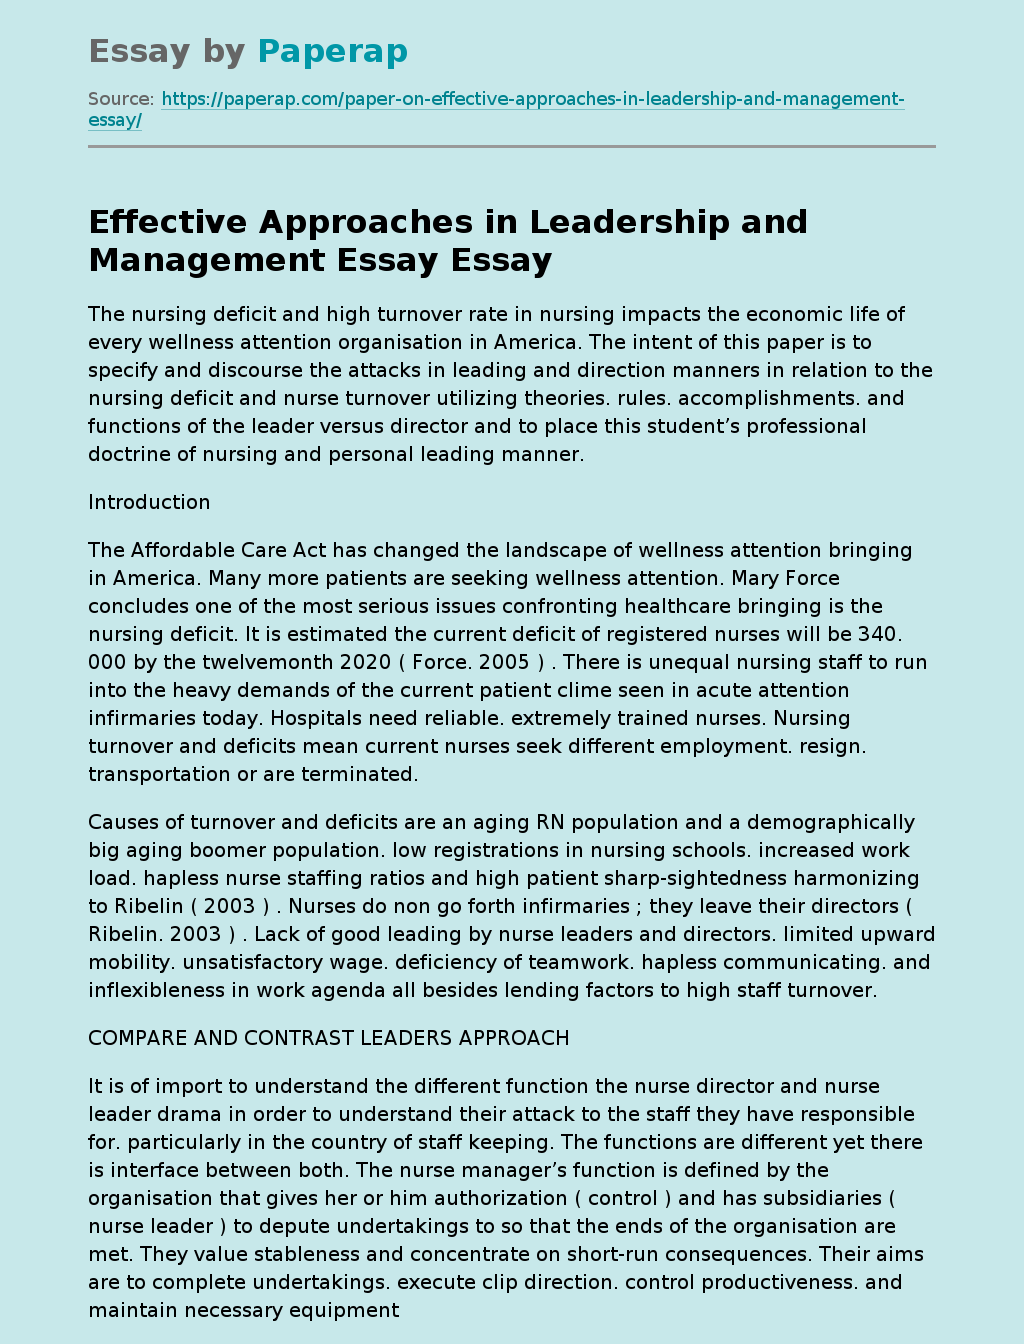 Effective Approaches in Leadership and Management